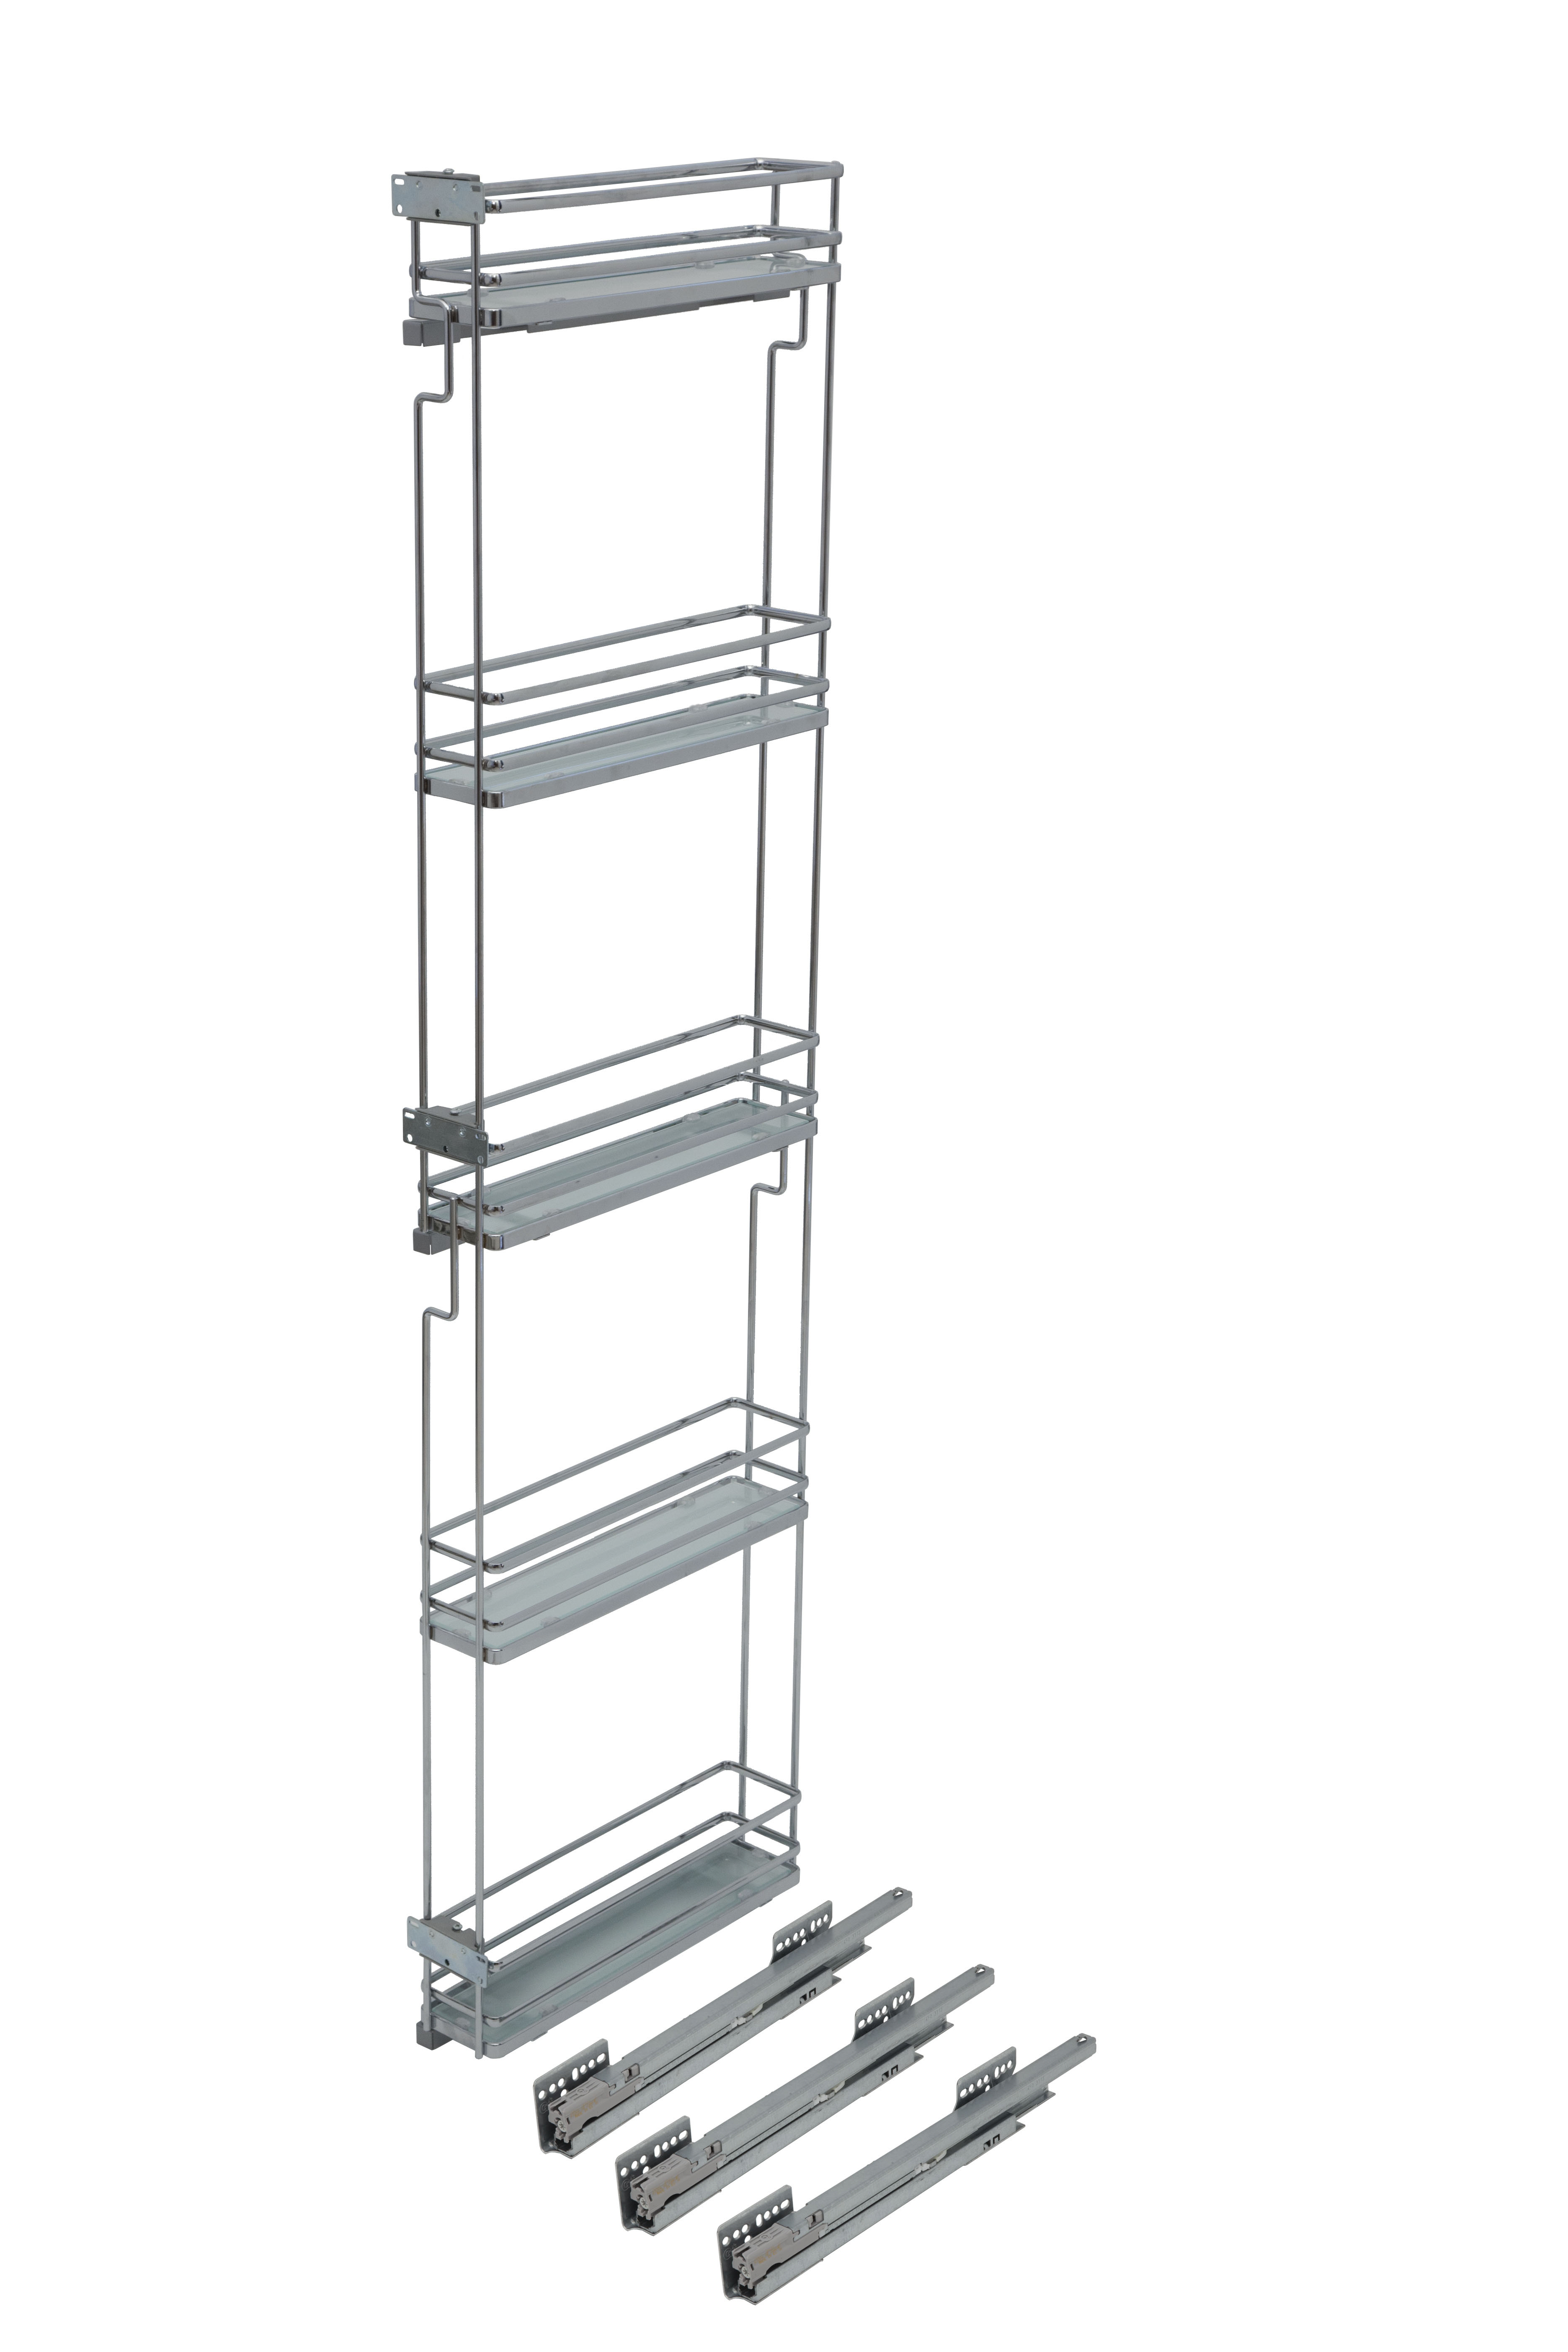 Vibo Filler Pull Outs for Narrow Pantry, White / Chrome